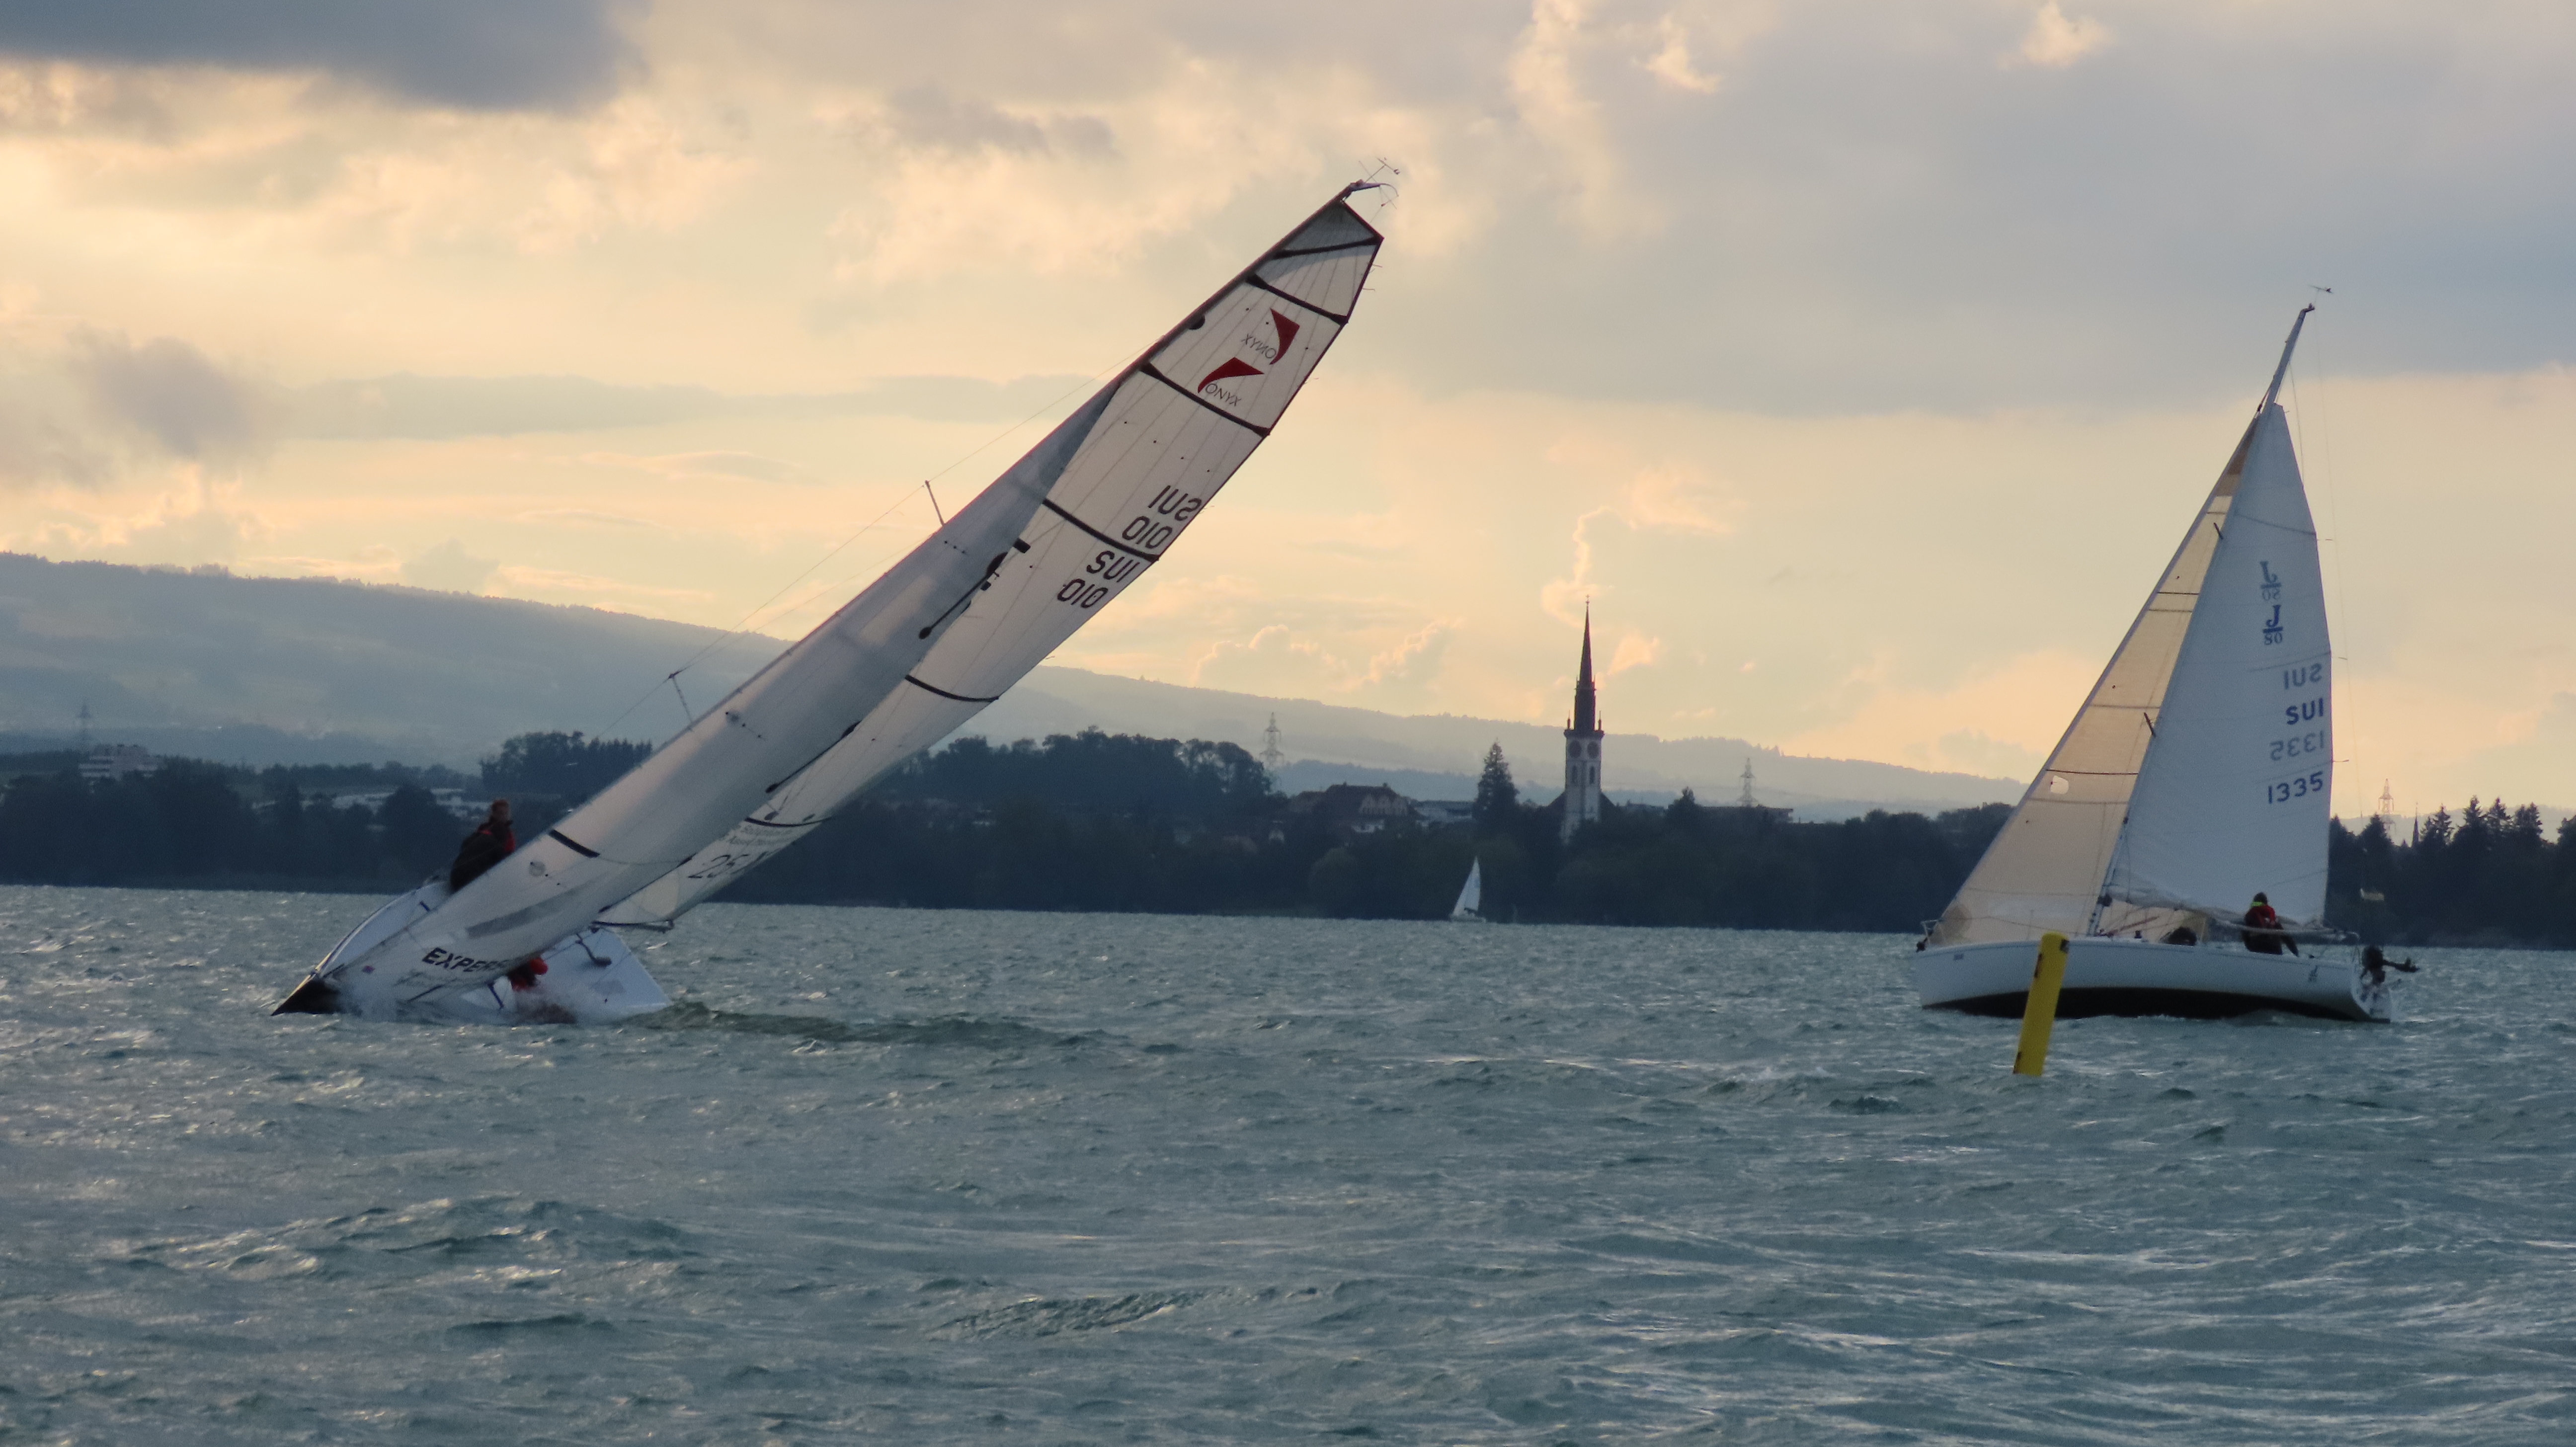  Weiss Yacht Cup  YC Zug  Final results